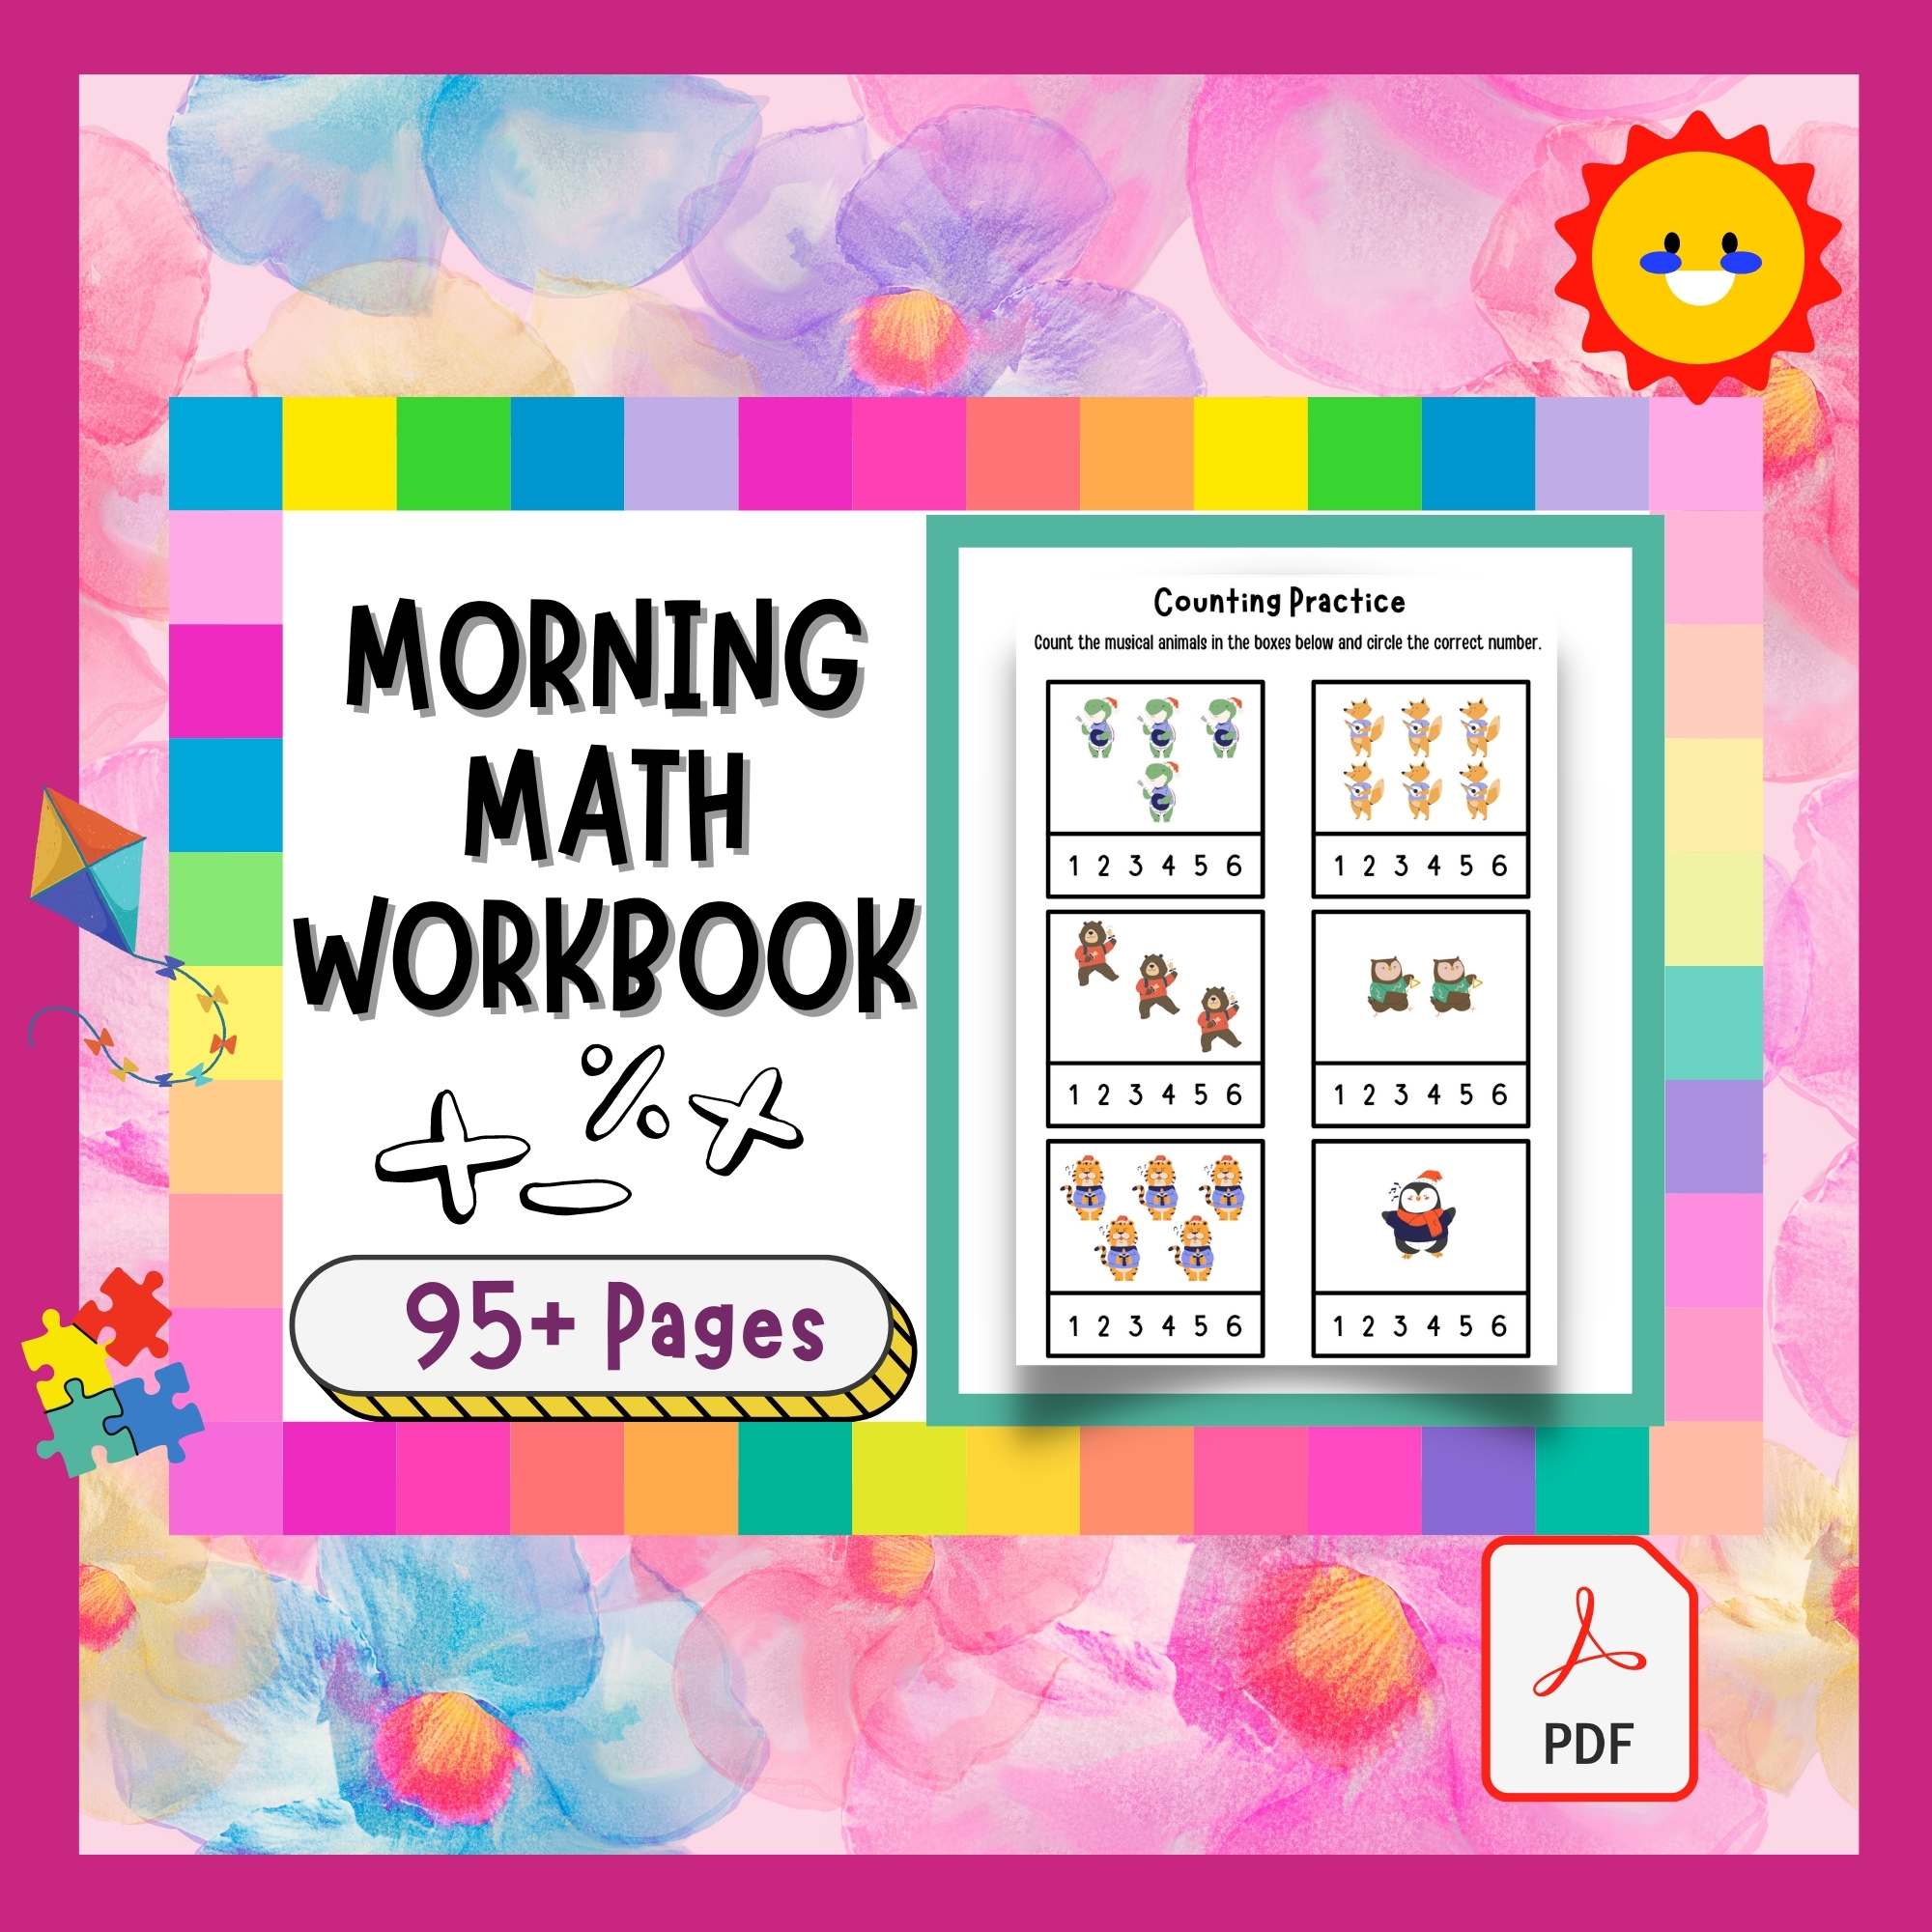 Morning Math Activities For Kids - Worksheets for Practicing Skills & Enrichment cover image.